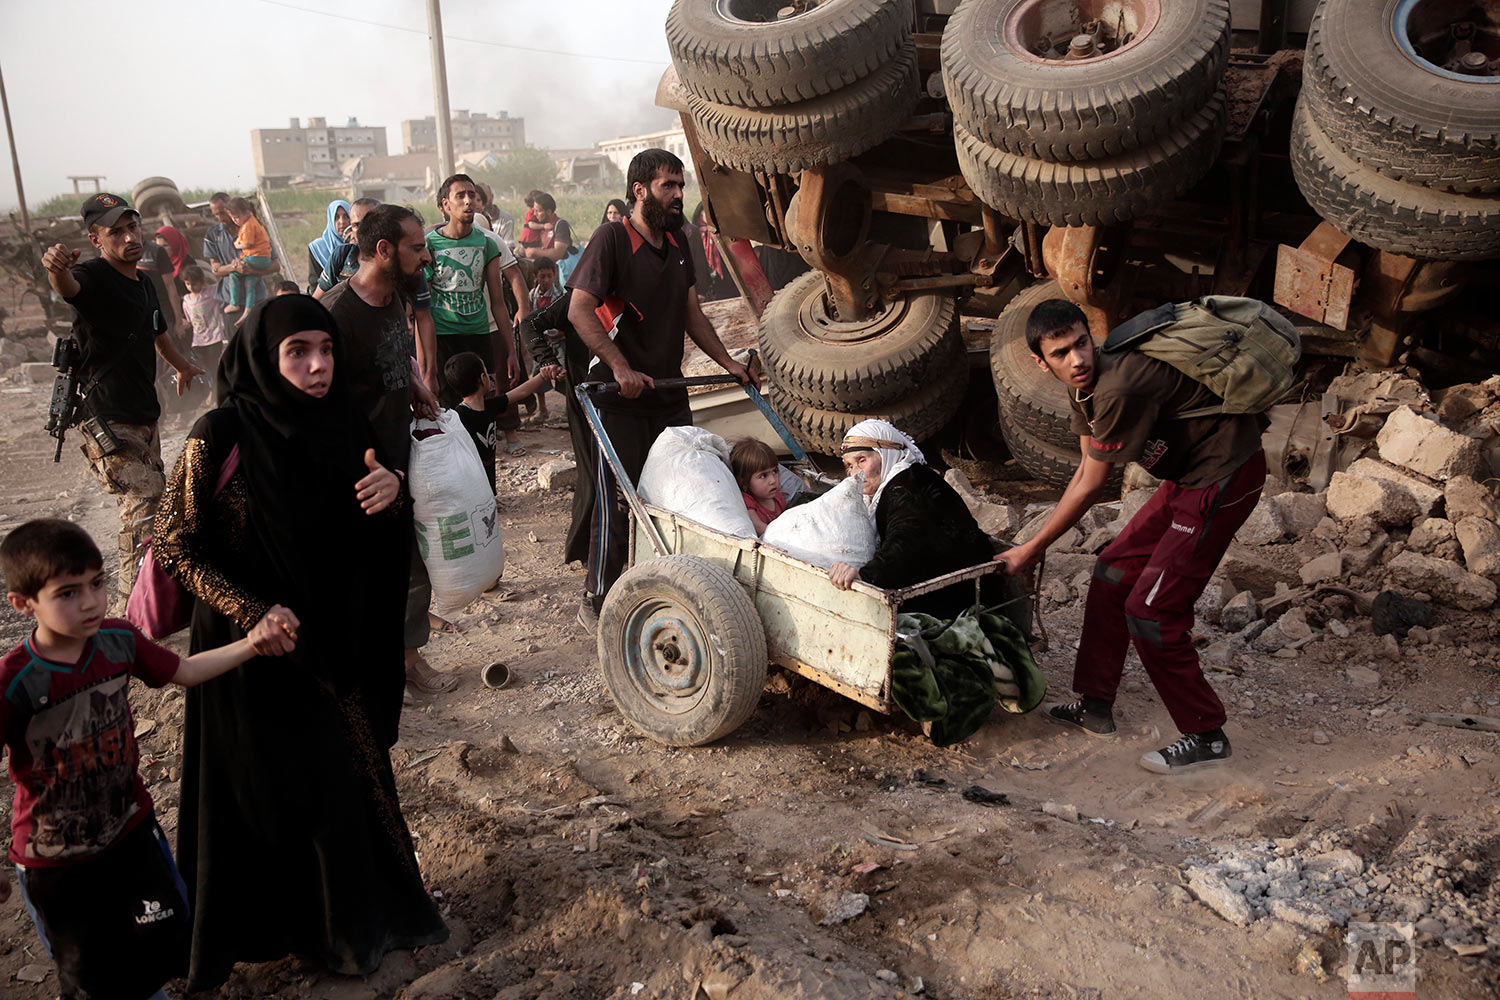  An elderly woman and a child are pulled on a cart as civilians flee heavy fighting between Islamic State militants and Iraqi special forces in western Mosul, Iraq on Wednesday, May 10, 2017. (AP Photo/Maya Alleruzzo) 